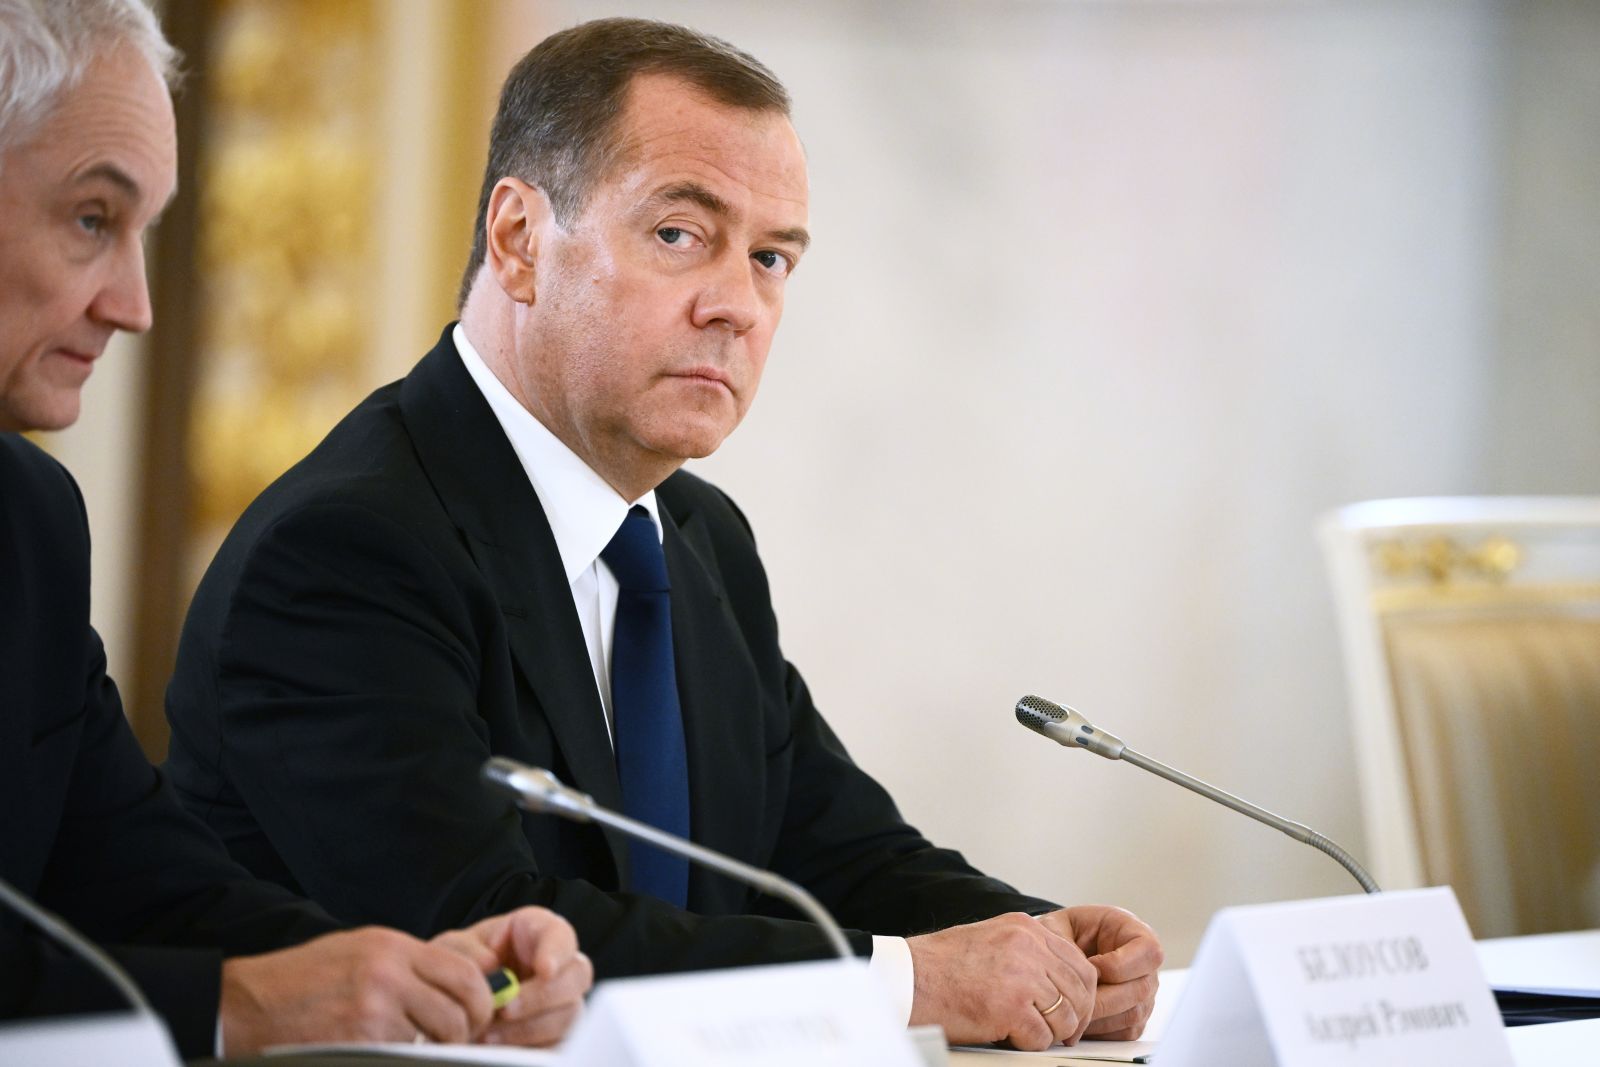 epa10535434 Deputy head of Russia's Security Council Dmitry Medvedev (R) attends the Russia - China talks at the Kremlin in Moscow, Russi 21 March 2023. Chinese President Xi Jinping arrived in Moscow on a three-day visit, which will last from March 20 to 22, according to Russian and Chinese state agencies. Xi Jinping visits Russia on improving joint partnership and developing key areas of Russian-Chinese economic cooperation.  EPA/ALEXEY MAYSHEV / SPUTNIK / KREMLIN POOL MANDATORY CREDIT